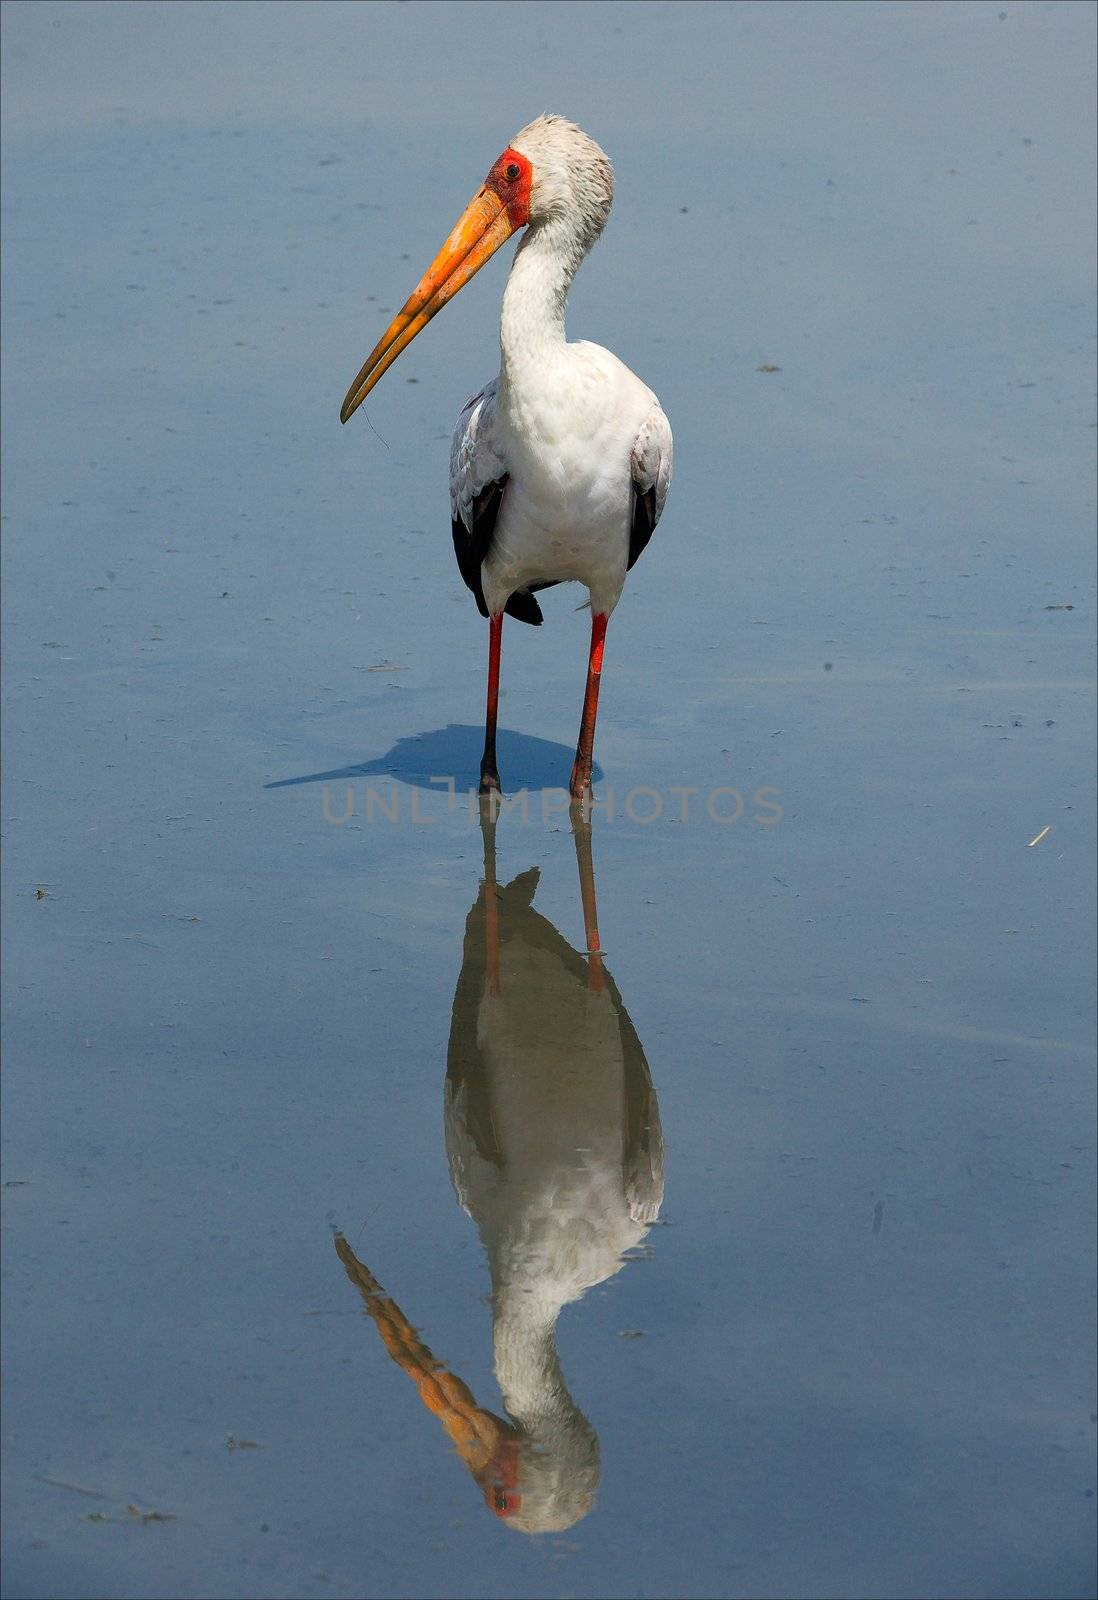 The Yellow-billed Stork and reflection. by SURZ